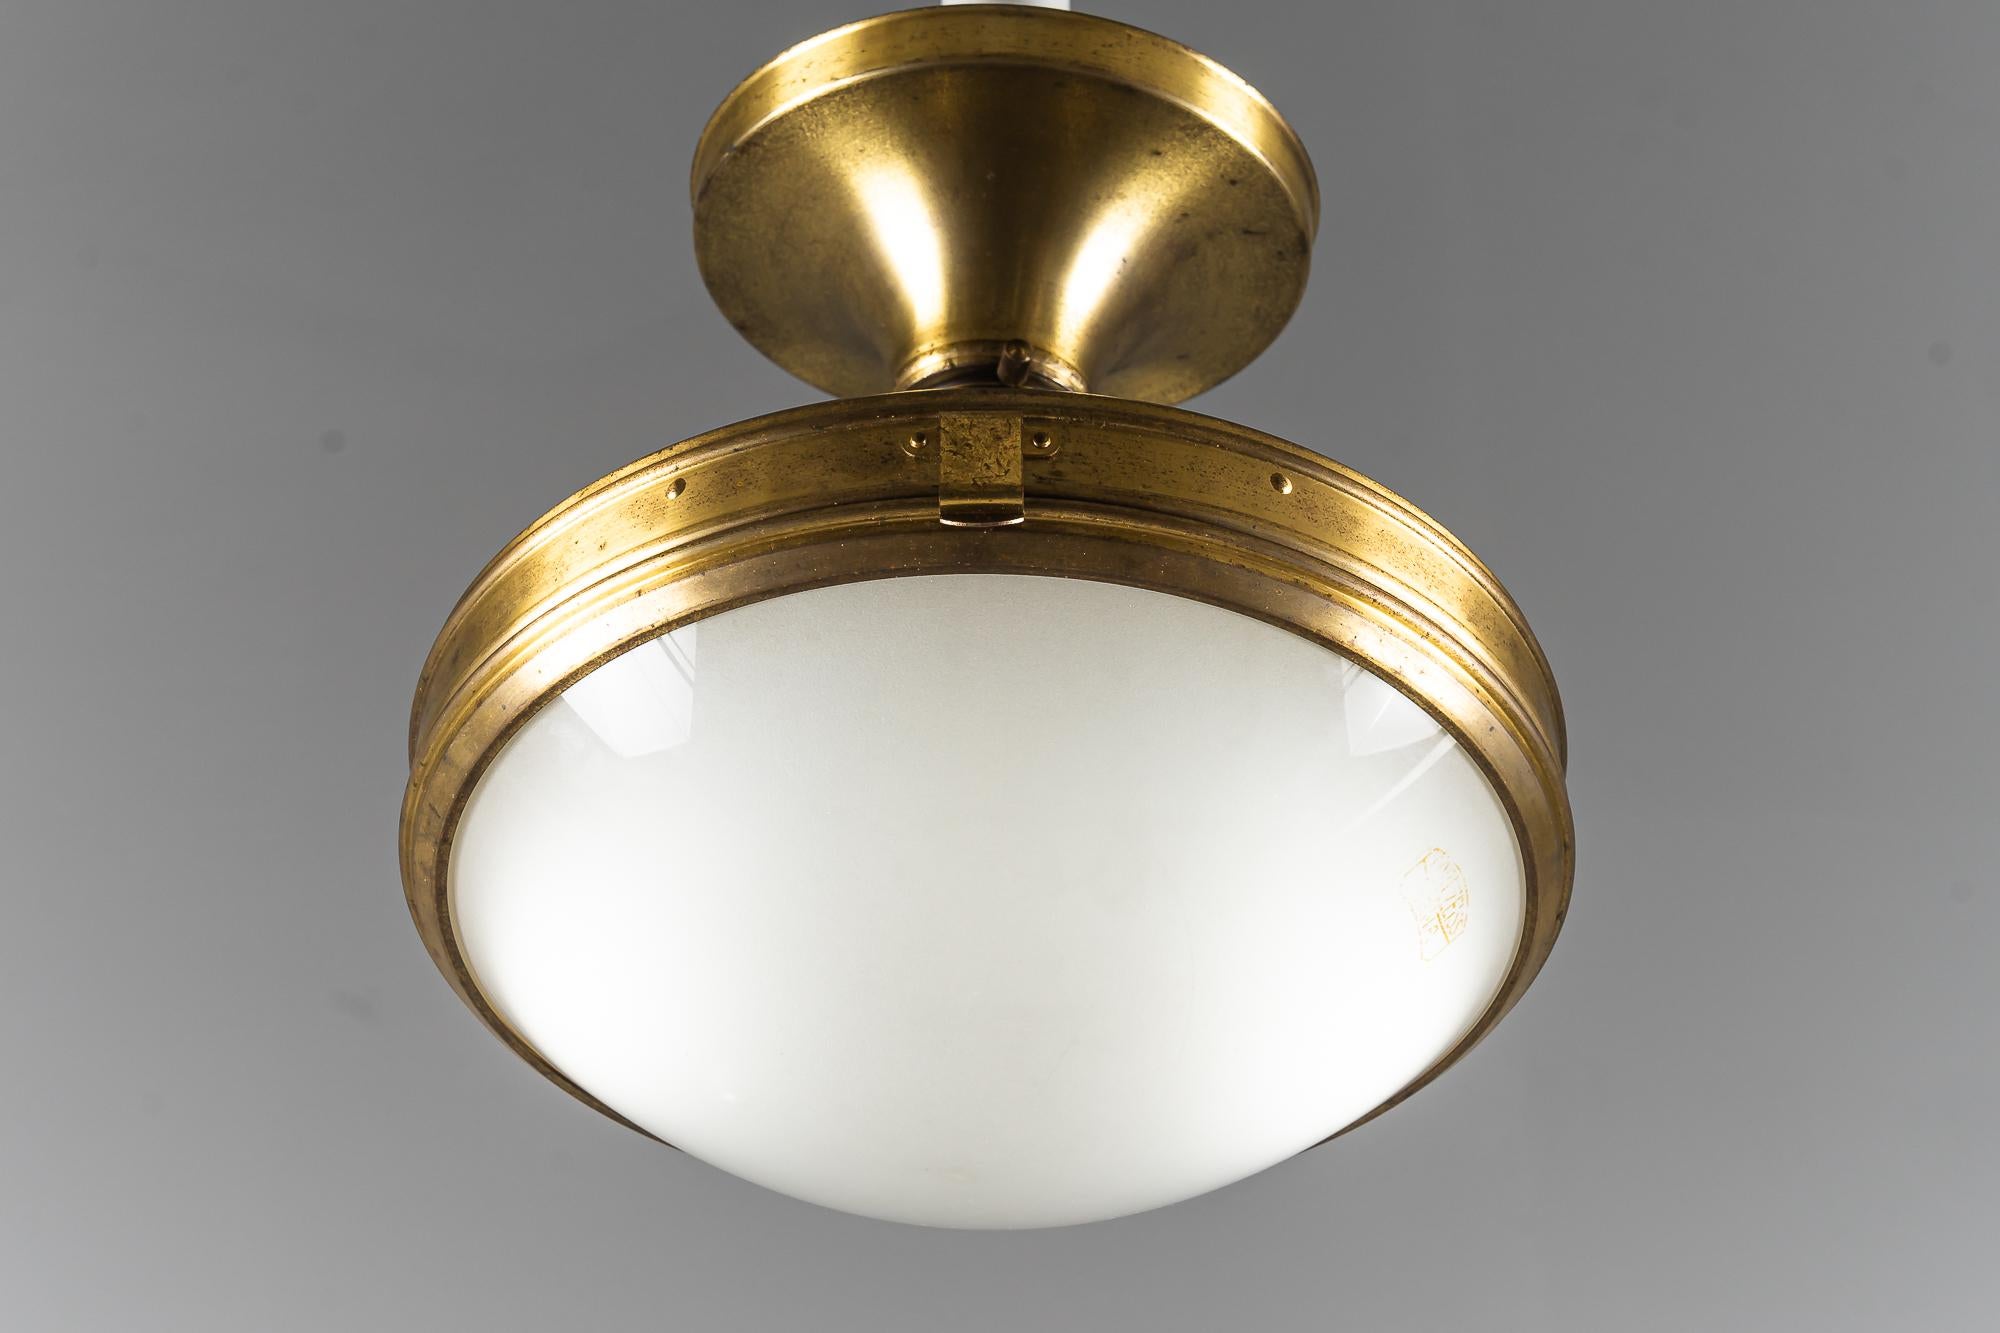 Rare Carl Zeiss jena ceiling lamp with original glass around 1930s (marked)
Original condition
Original glass shade (marked with zeiss logo).